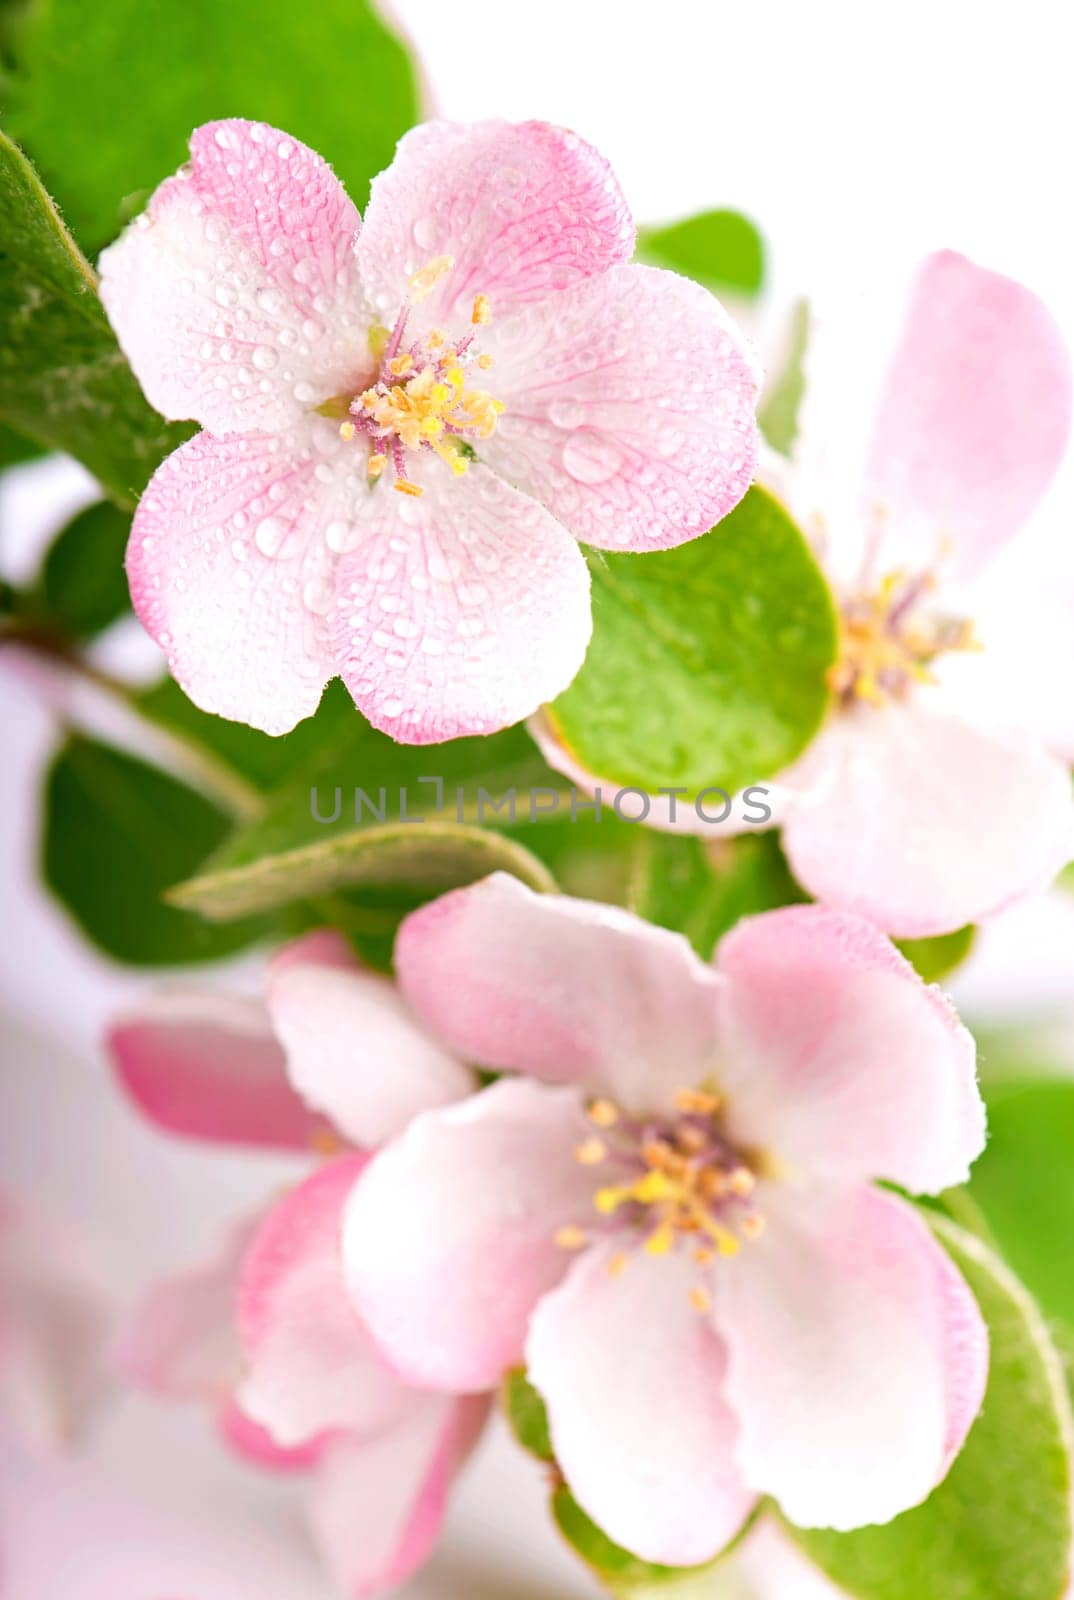 Pink apple tree flowers blossoms with green leafs on white background by aprilphoto